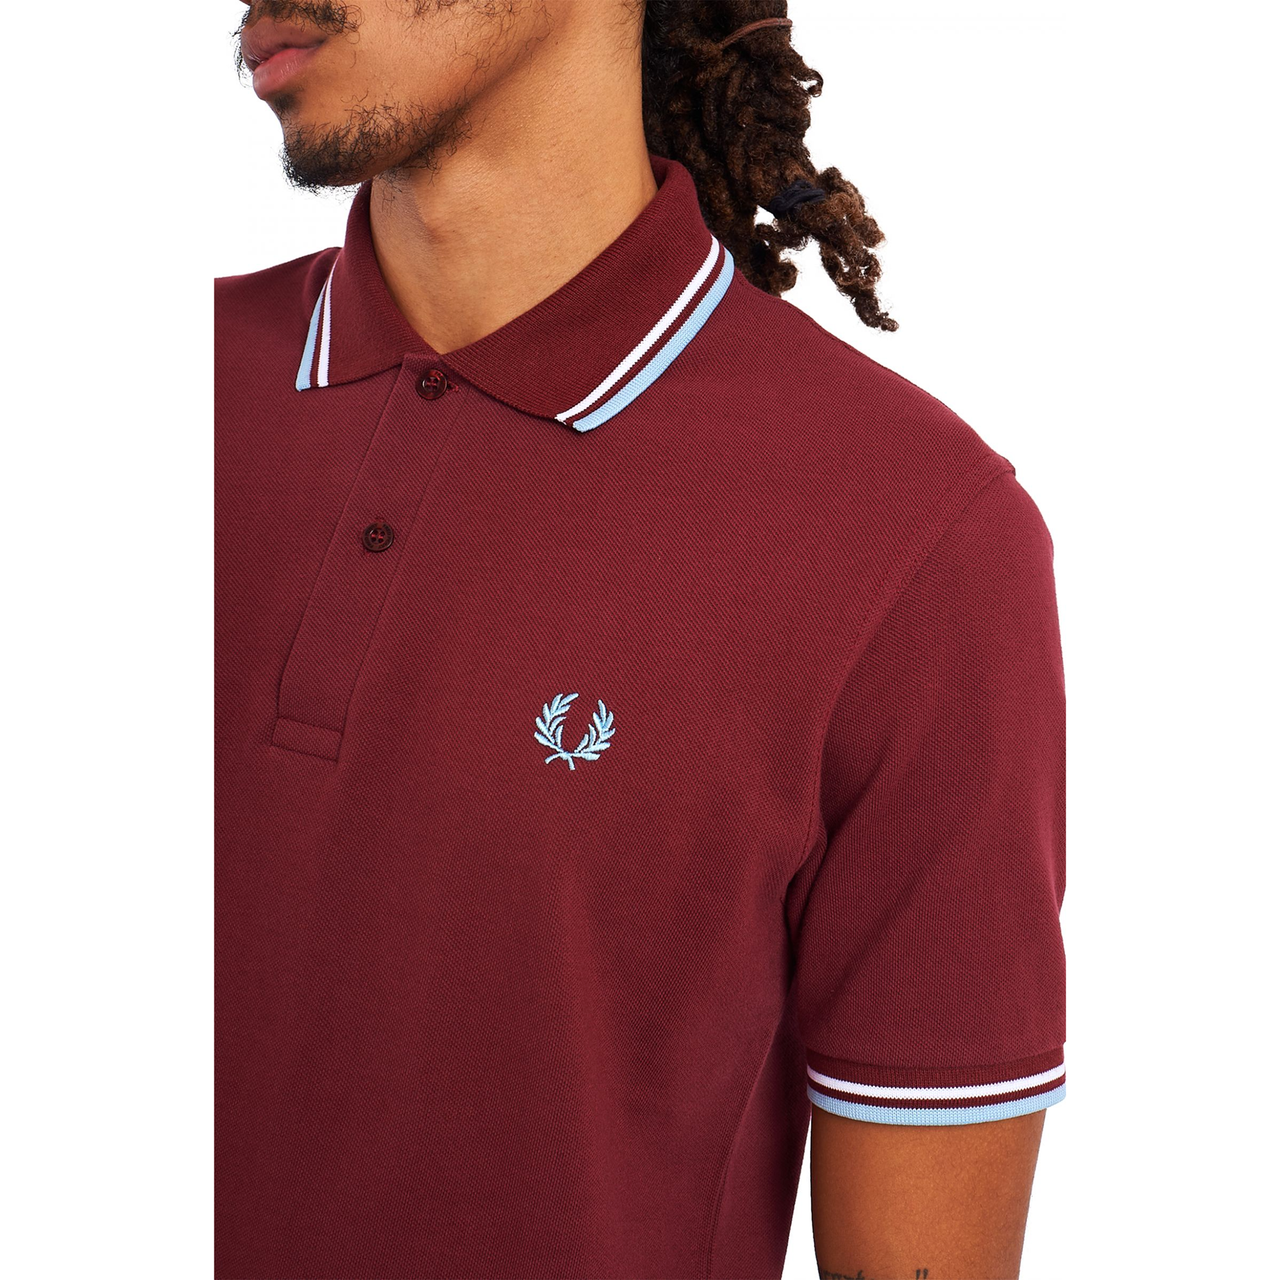 FRED PERRY TWIN TIPPED POLO SHIRT MAROON/WHT/ICE